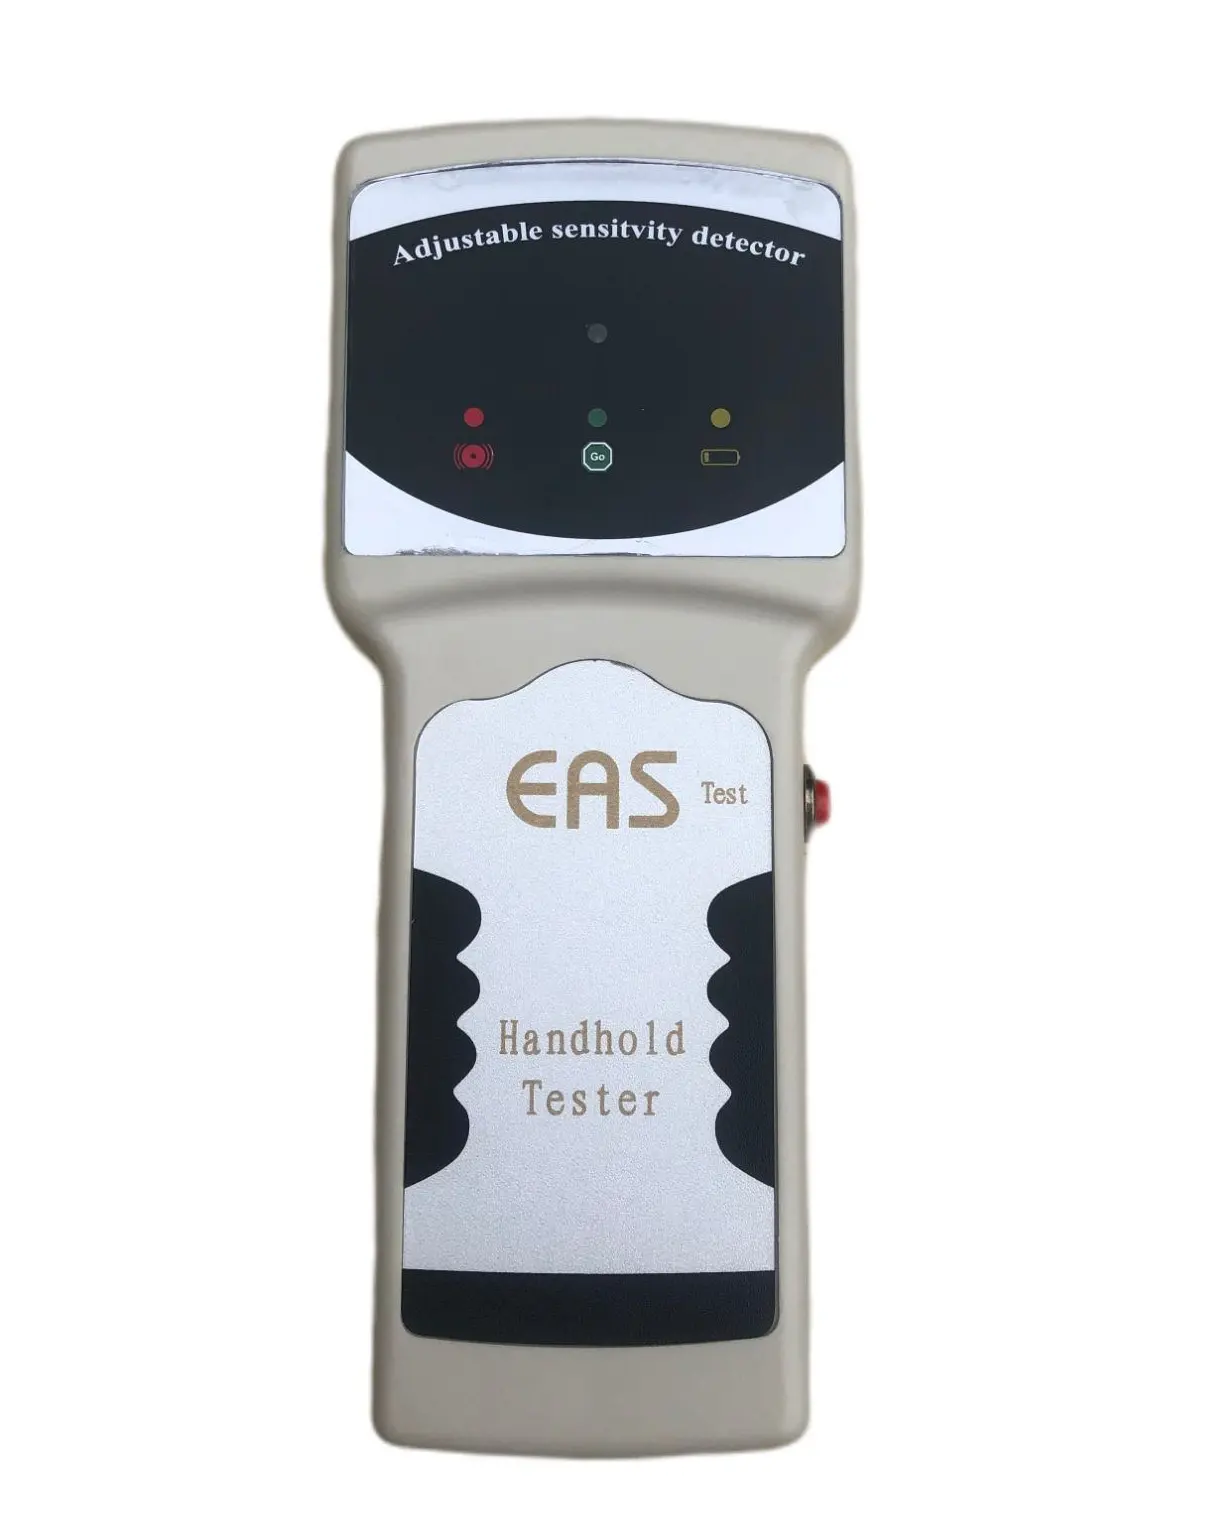 RF Handheld Detector 8.2Mhz EAS accessory Anti-theft product for Retail Supermarket